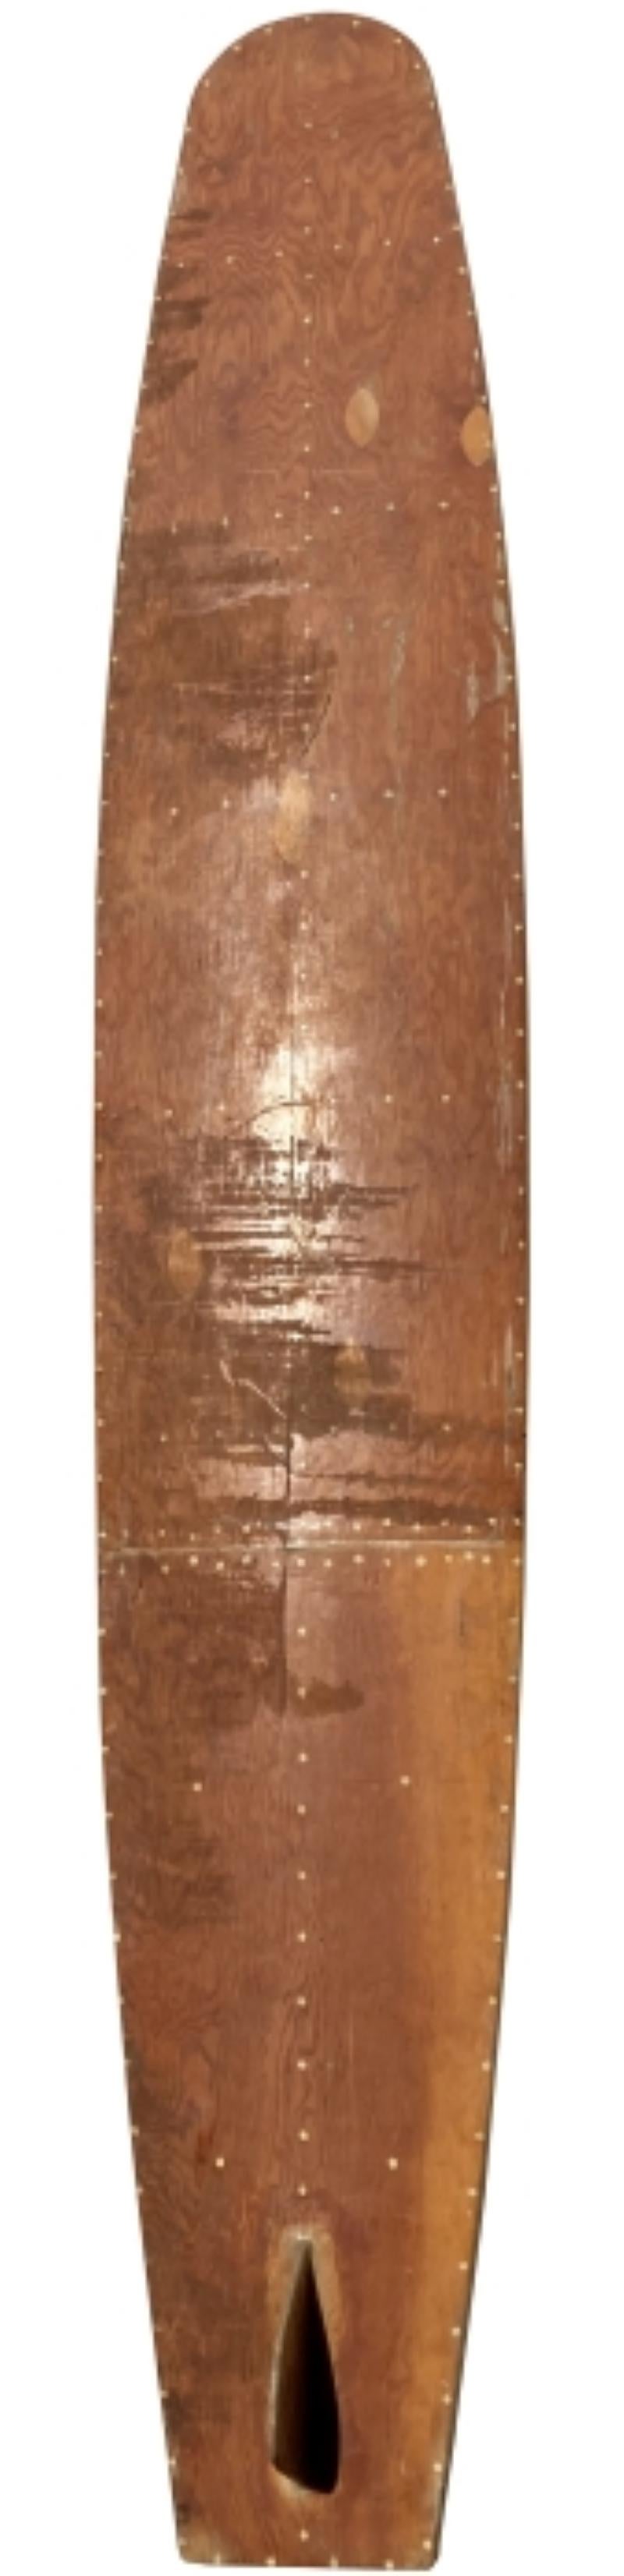 Late-1930s KookBox hollow wood surfboard. Purchased initially by a WWII veteran stationed at Pearl Harbor, Hawaii who was later killed in action during the war. Upon his death, the soldier's belongings, along with this surfboard was mailed from